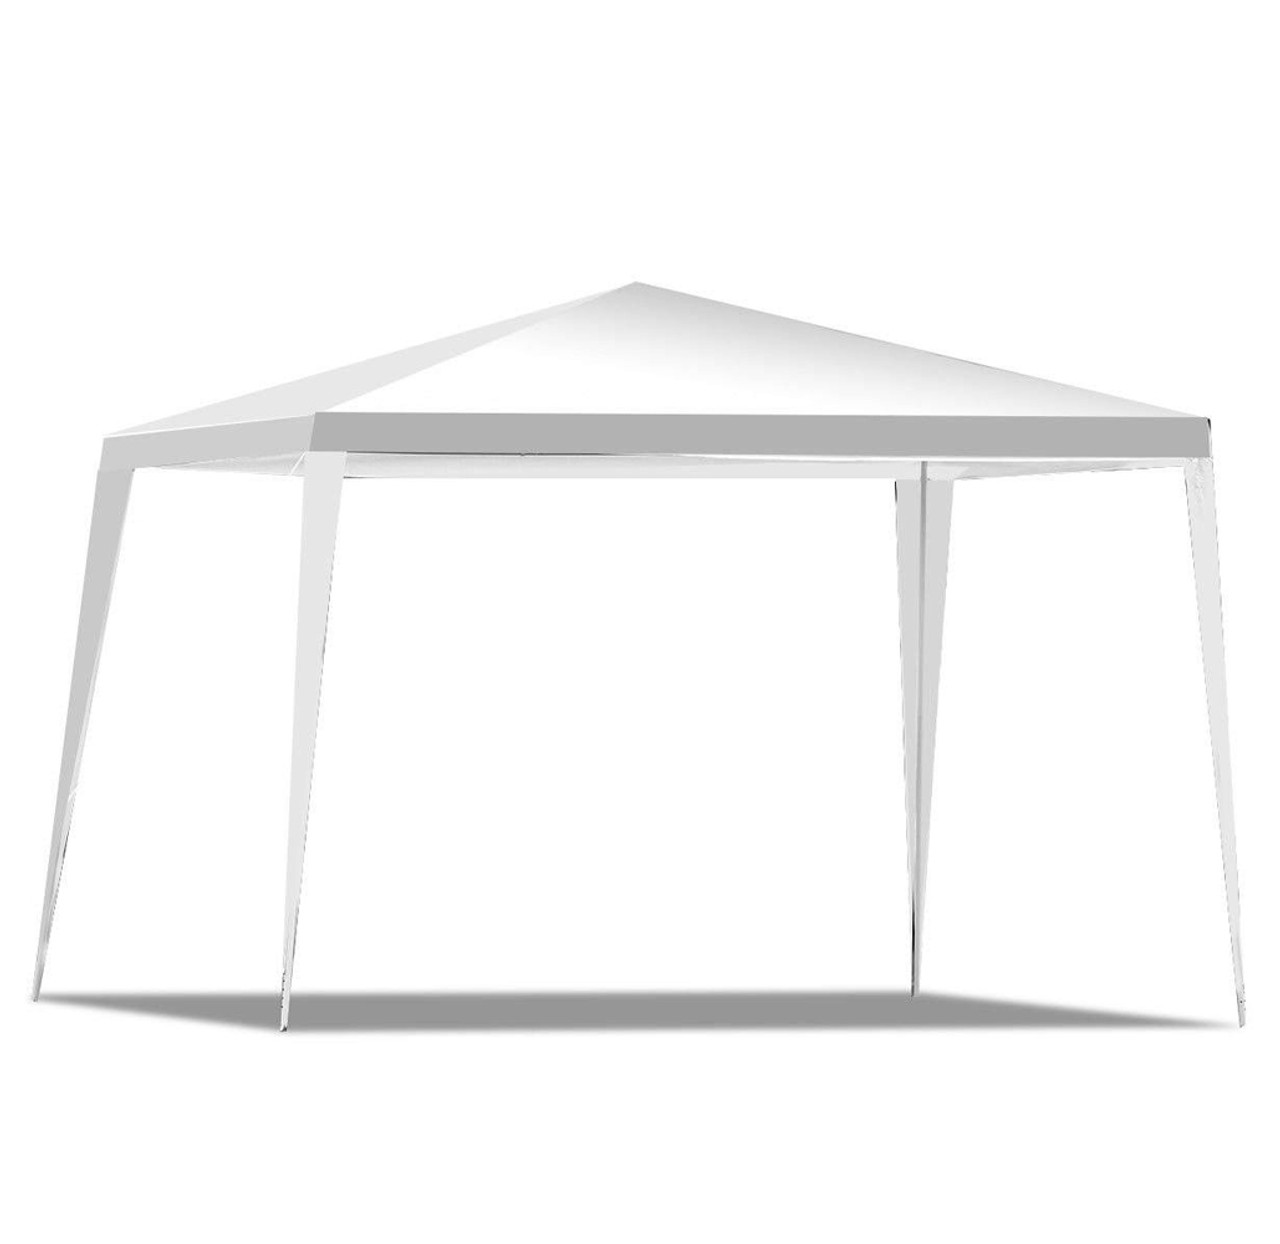 Waterproof 10' x 10' Outdoor Canopy product image